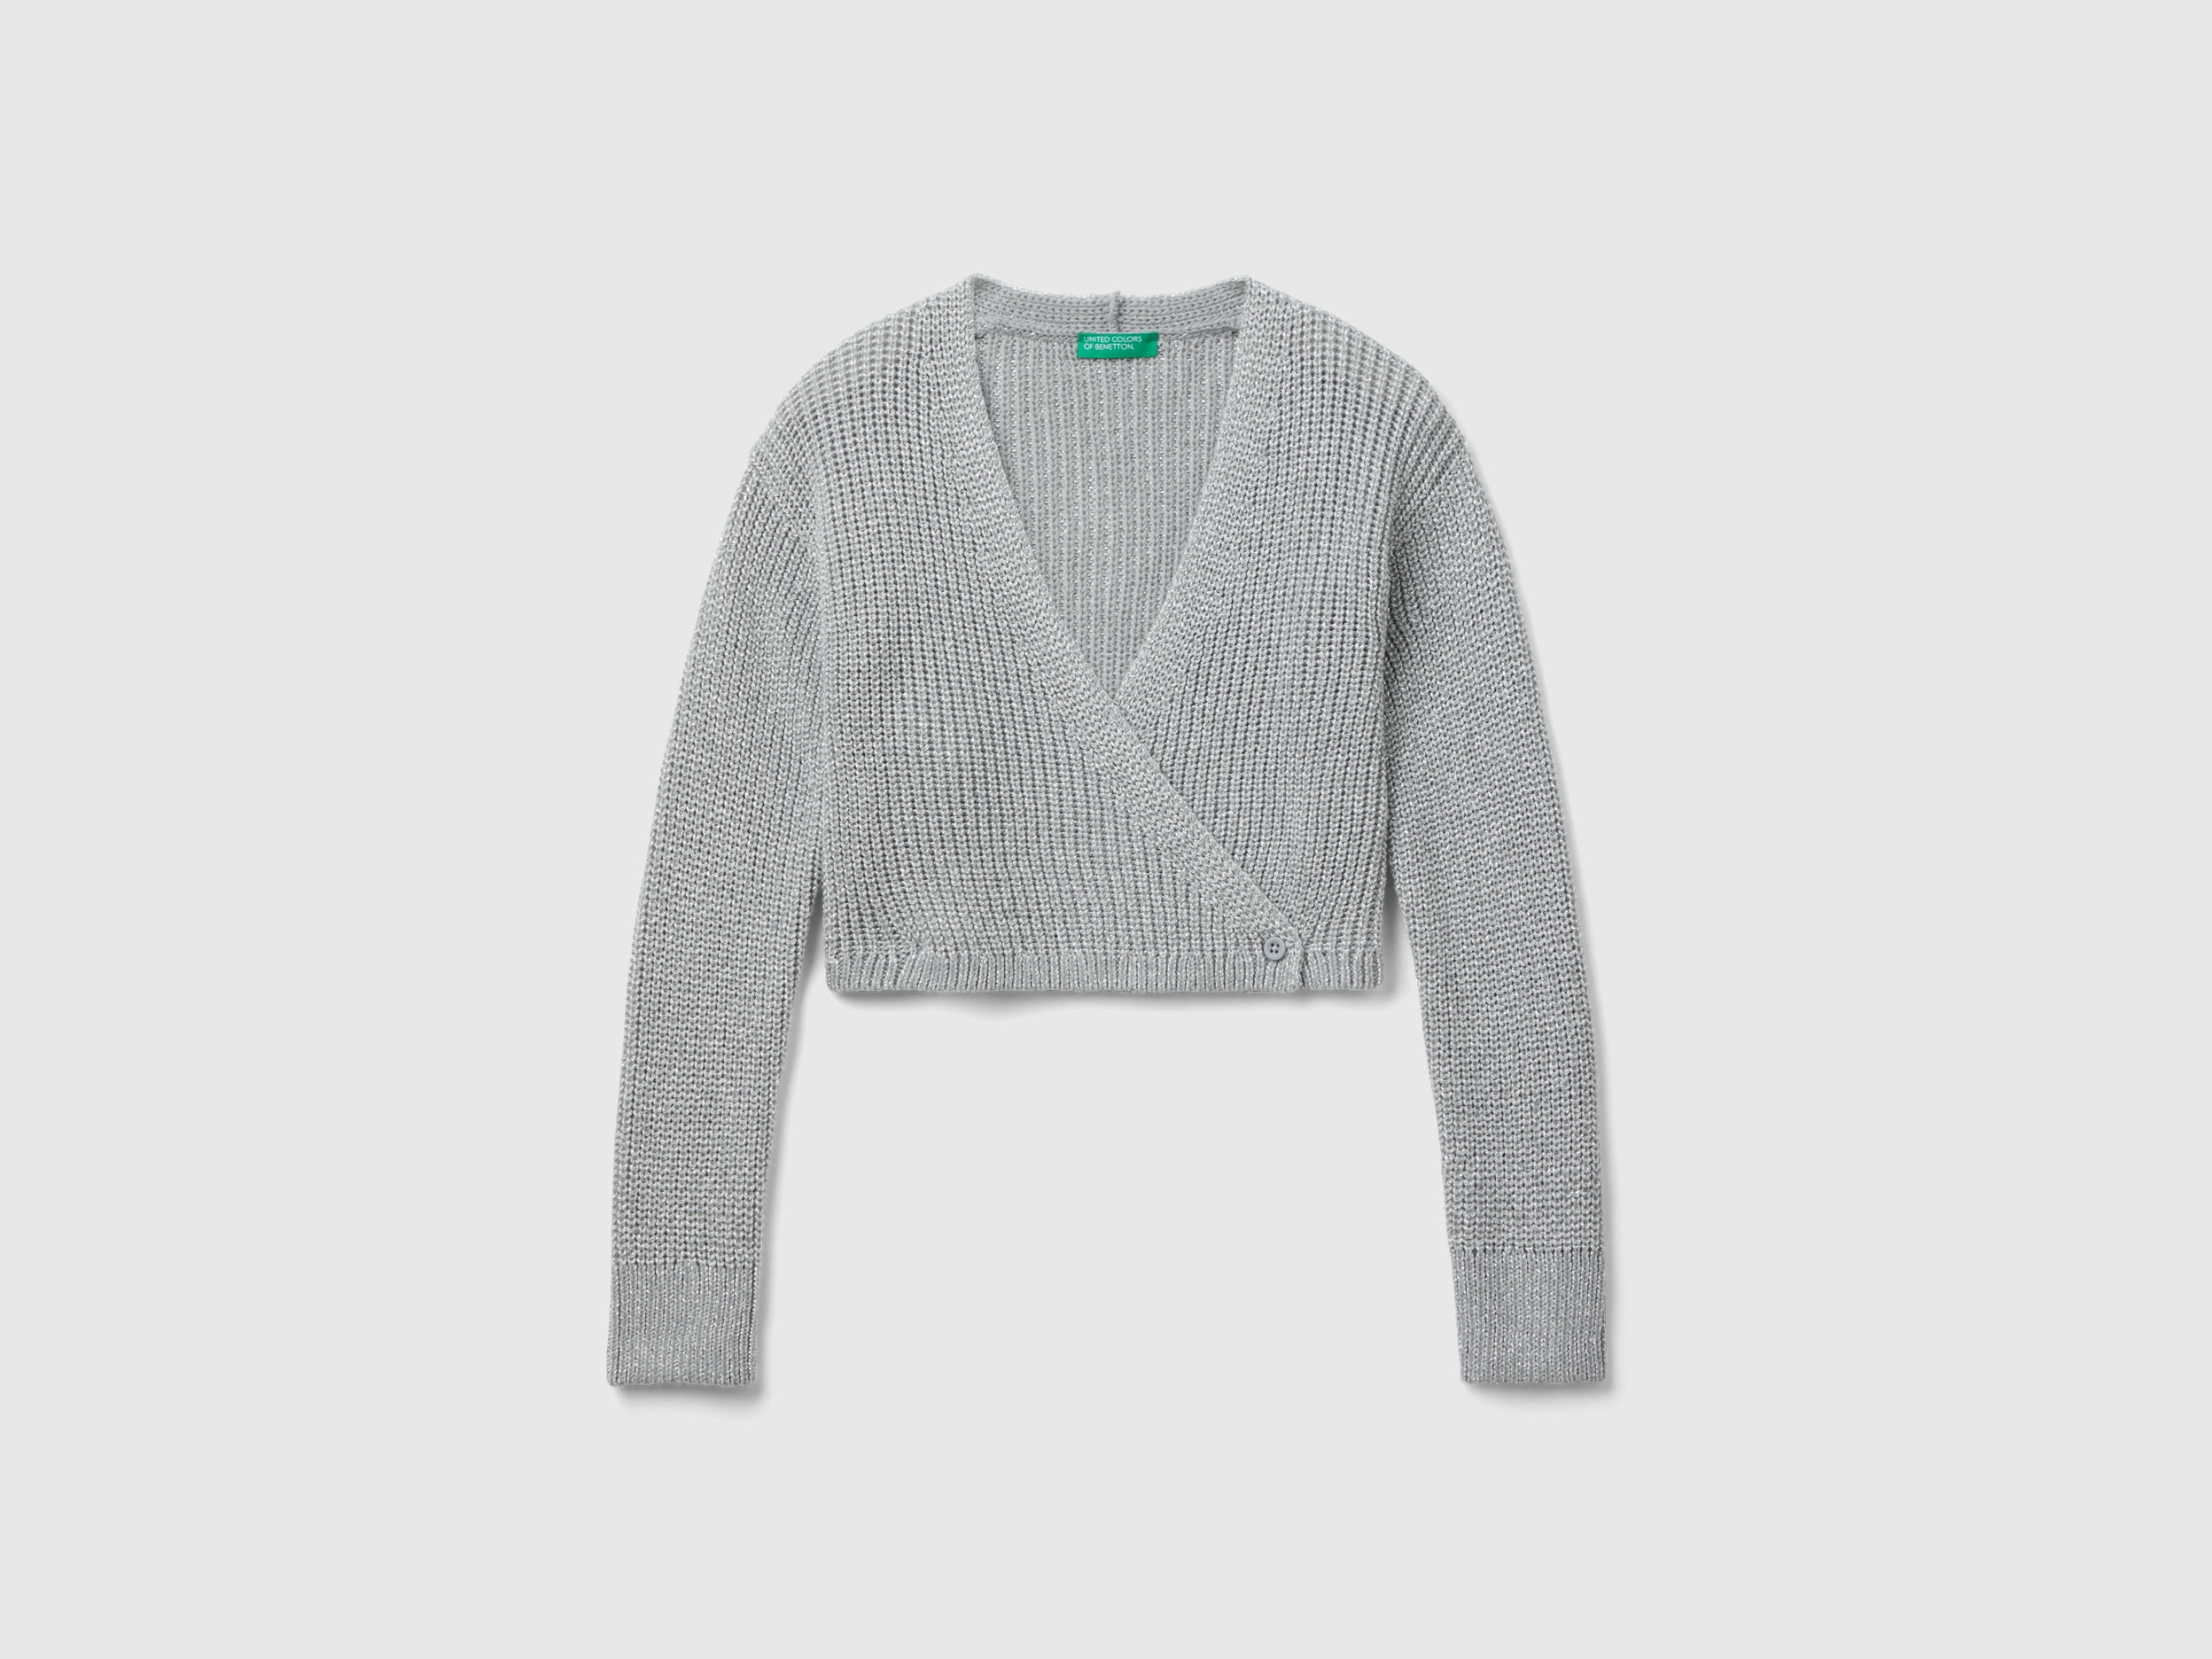 Benetton, Cropped Cardigan With Lurex, size S, Light Gray, Kids